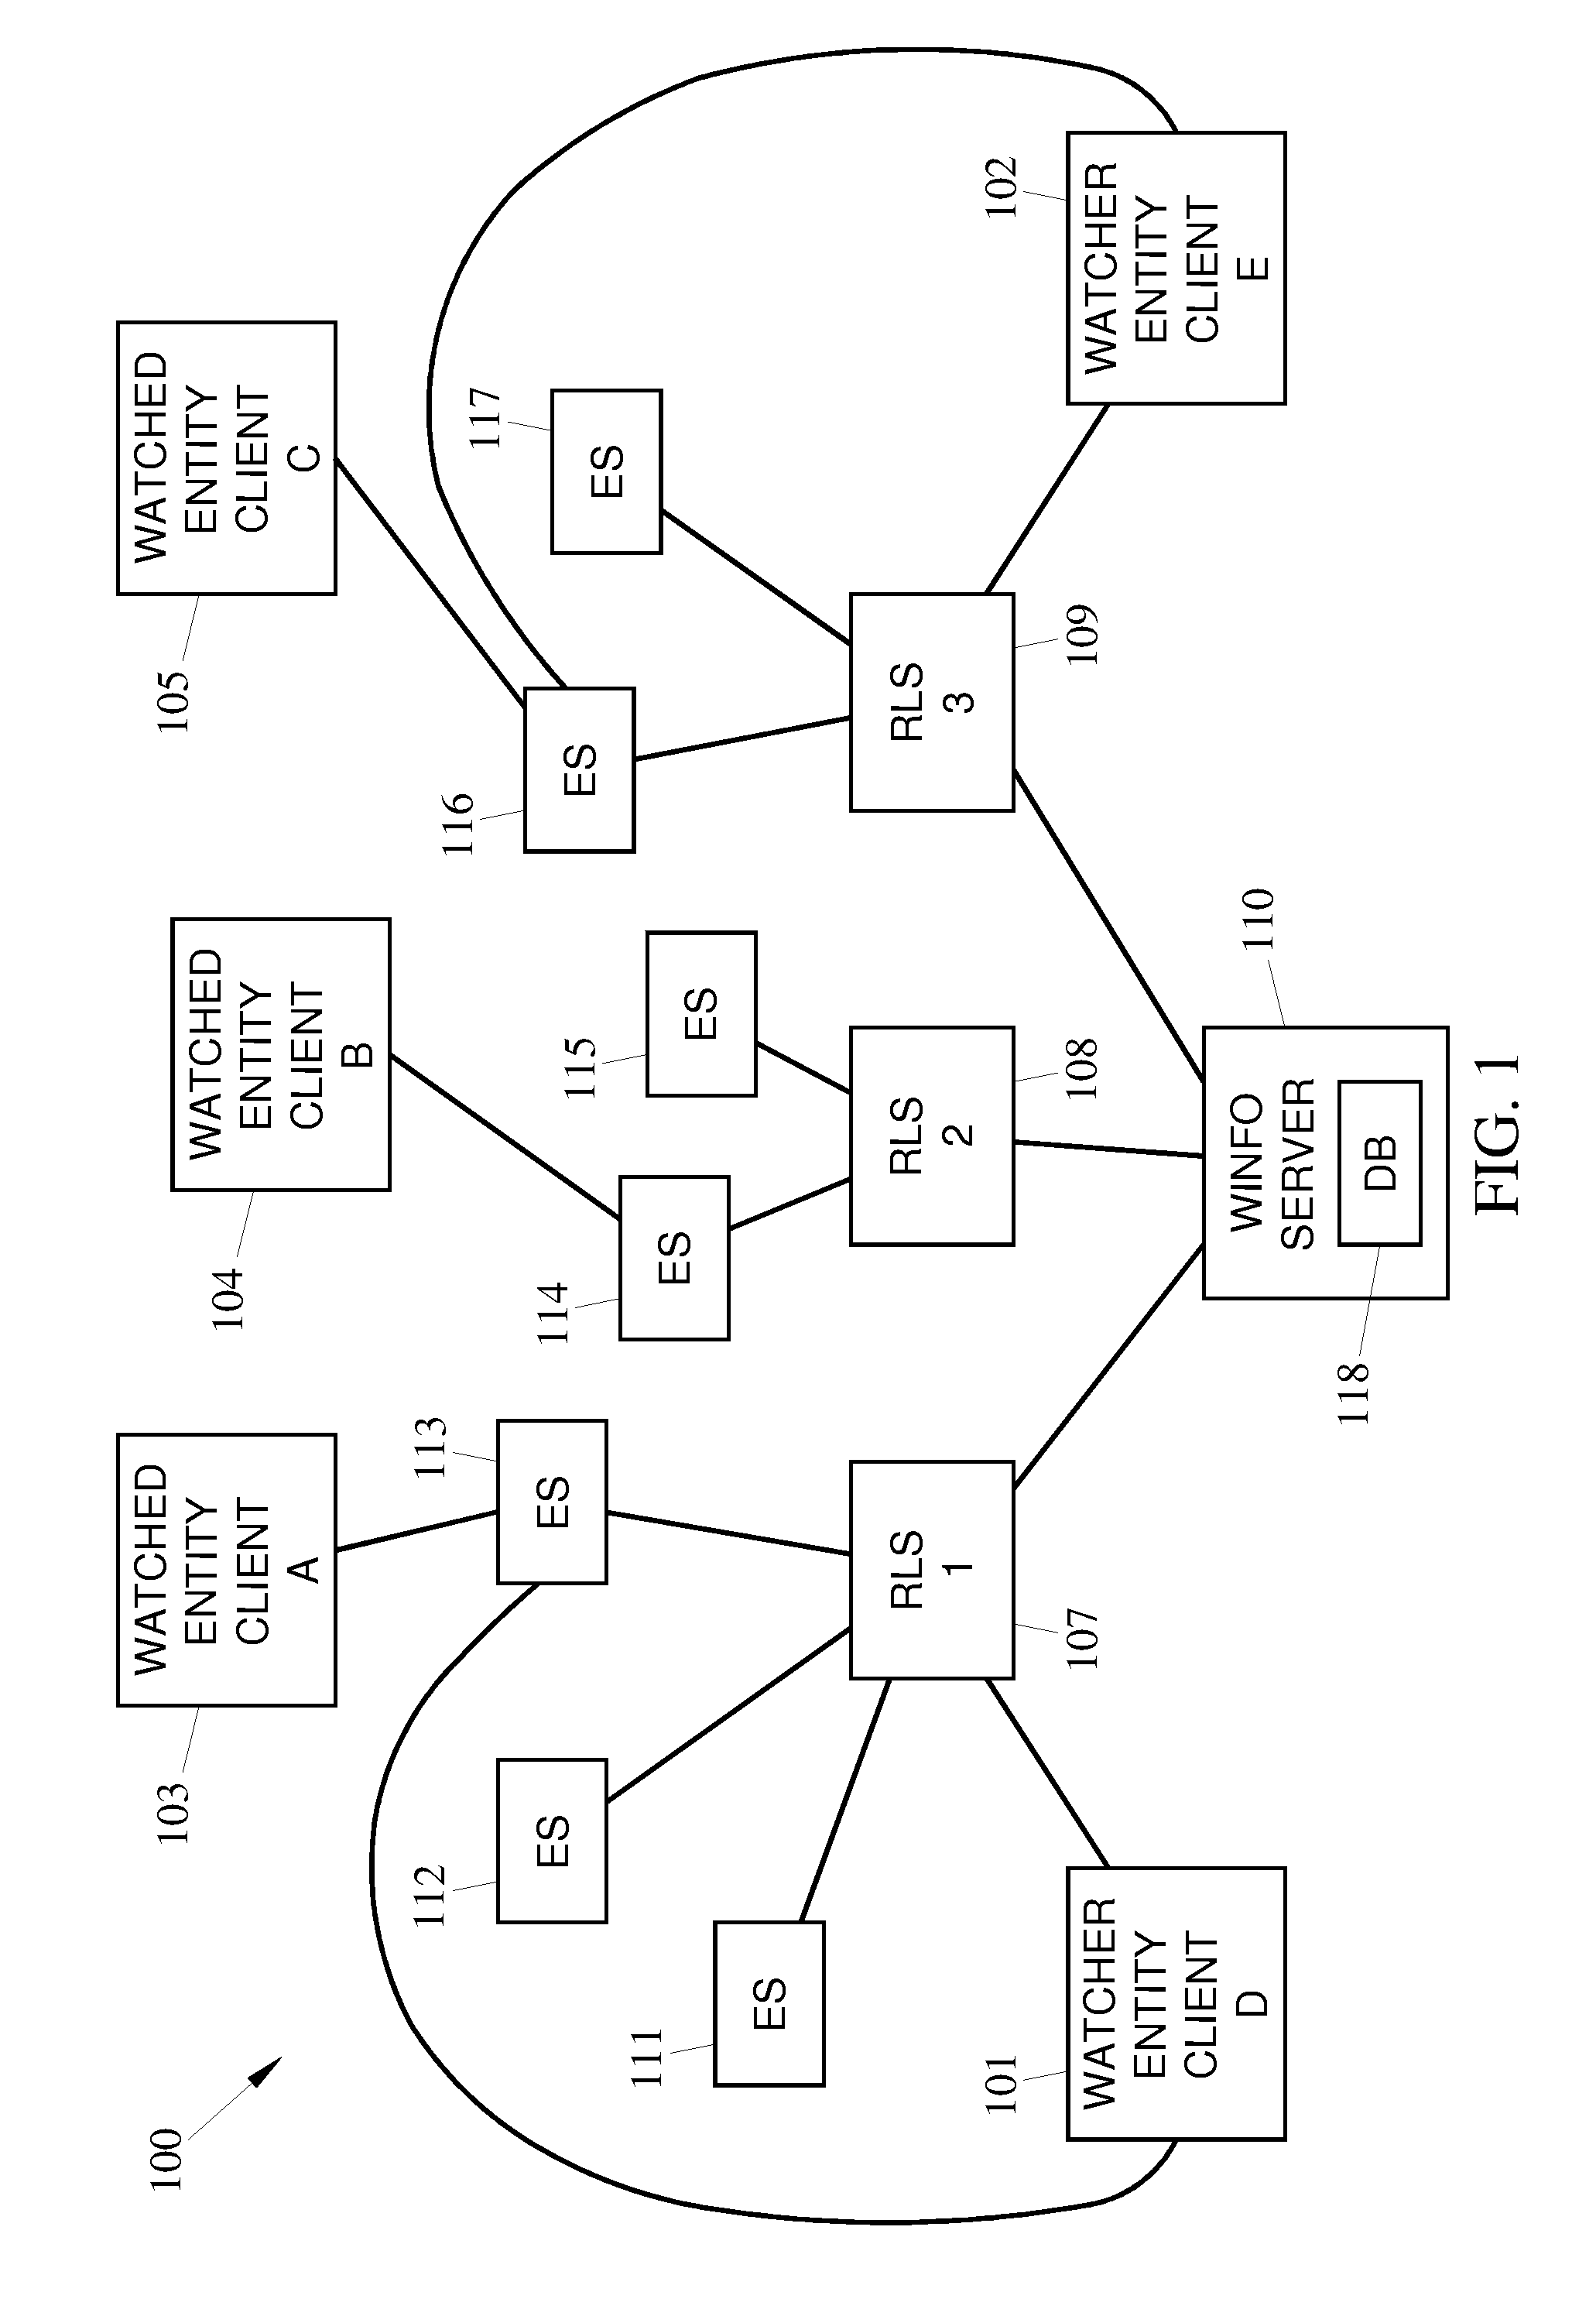 Methods, systems and computer readable media for providing a failover measure using watcher information (WINFO) architecture